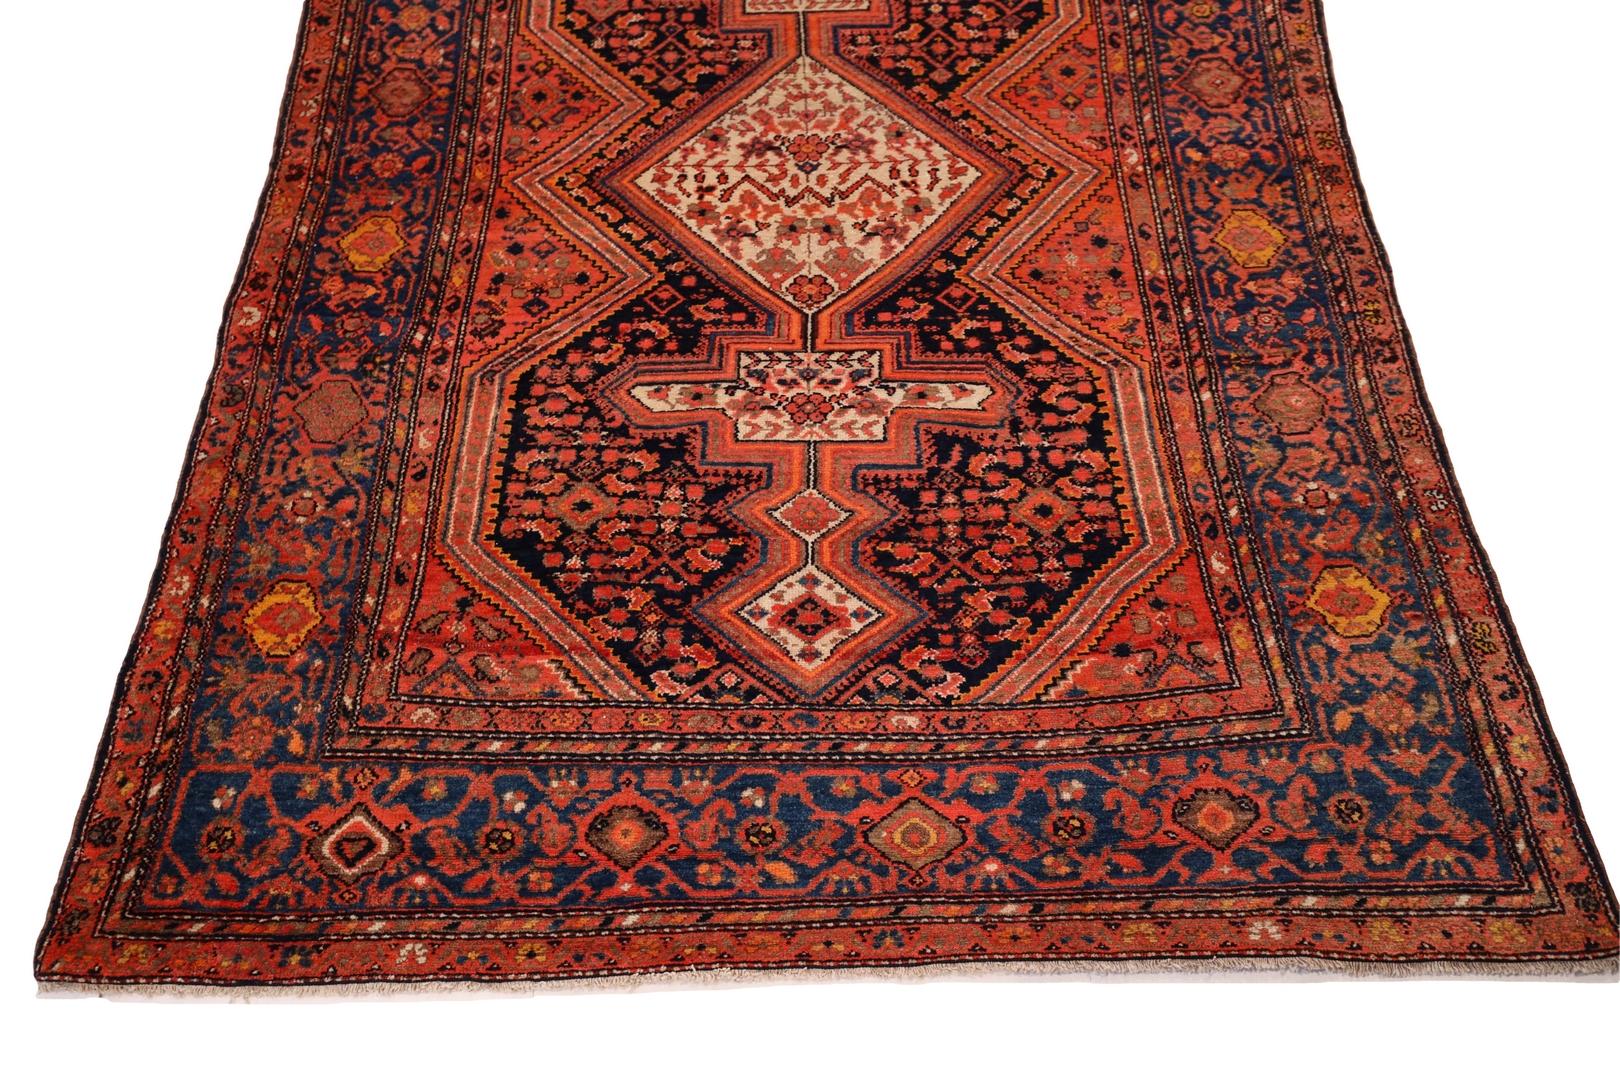 Introducing the magnificent Malayer rug, a true masterpiece that will undoubtedly bring joy and warmth to any home. This rug boasts a rich ruby red hue, which immediately draws the eye in and commands attention. The stunning ivory medallion is the